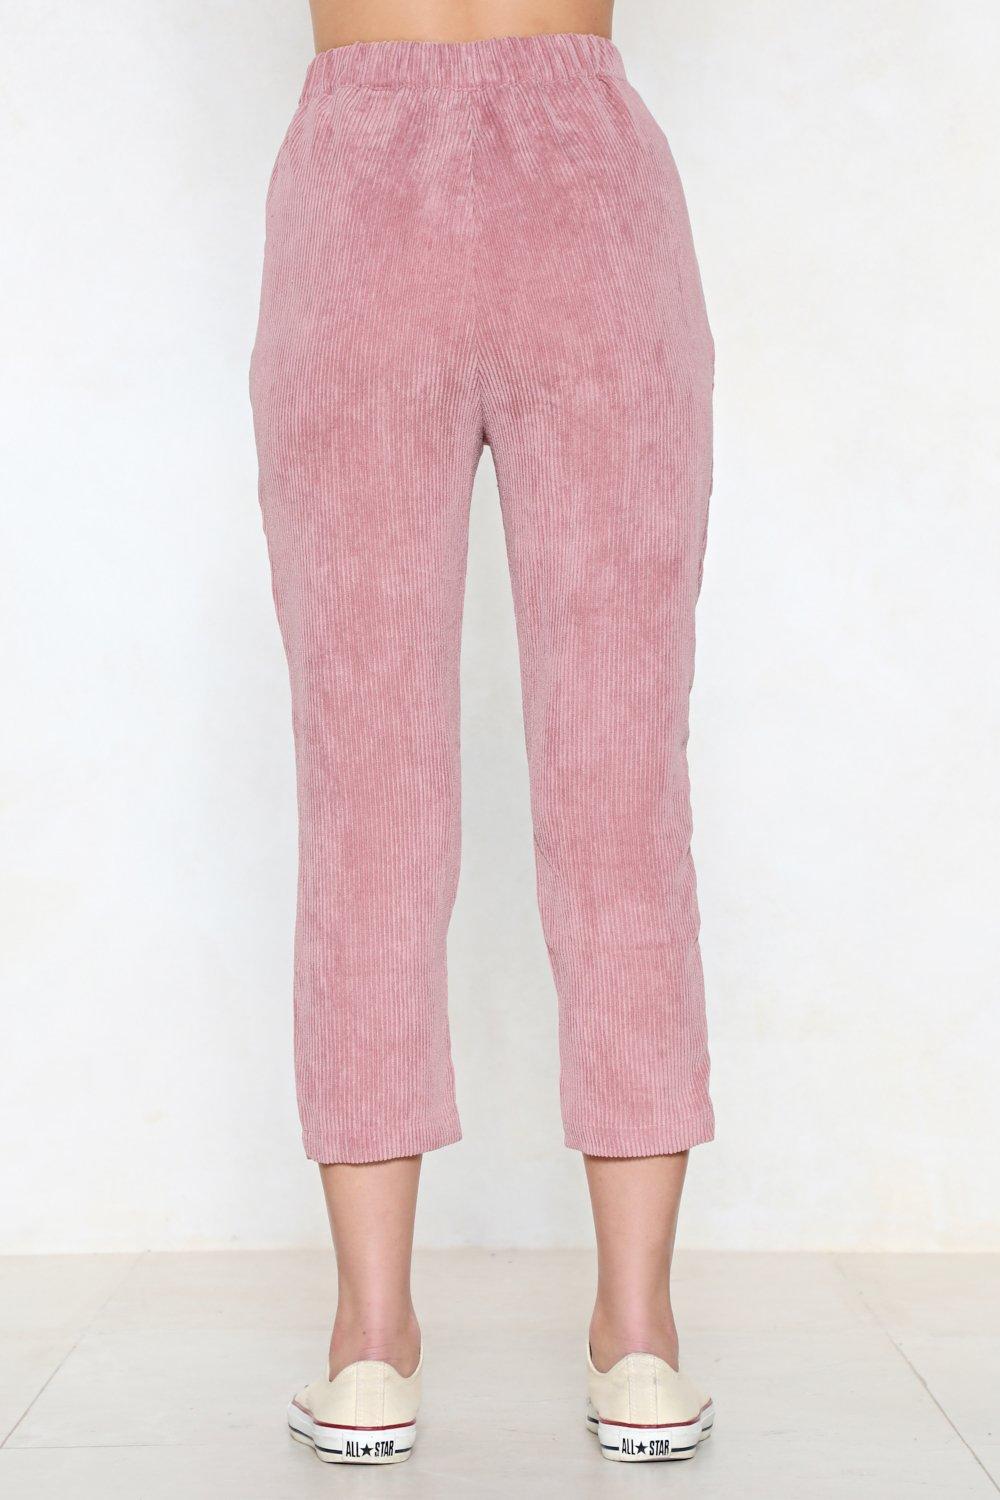 corduroy pink trousers